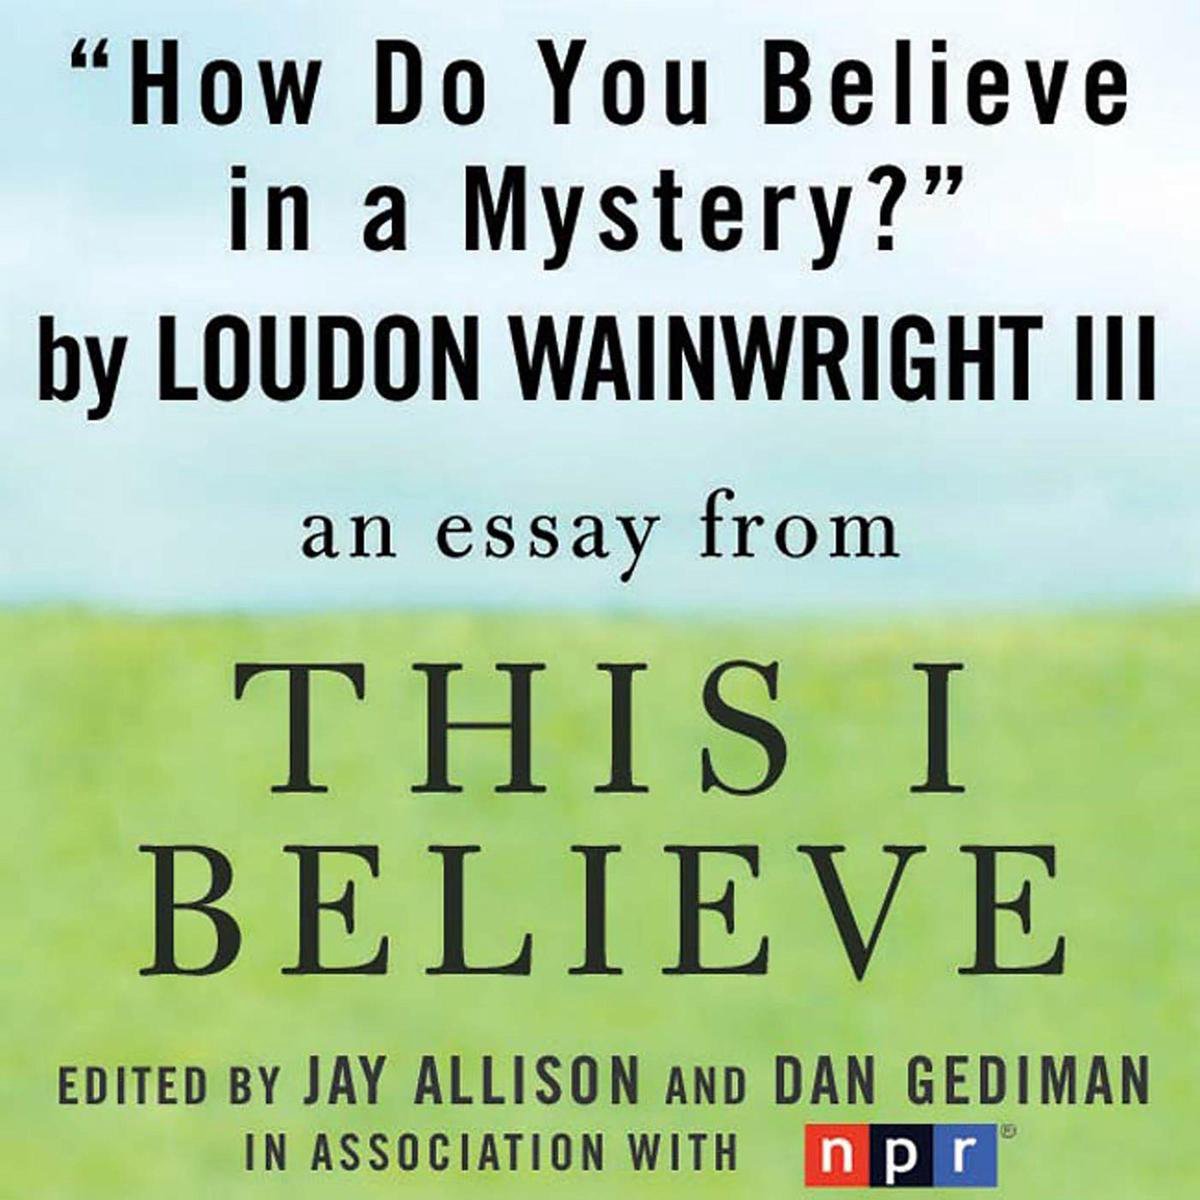 How Do You Believe in a Mystery? - Loudon Wainwright III